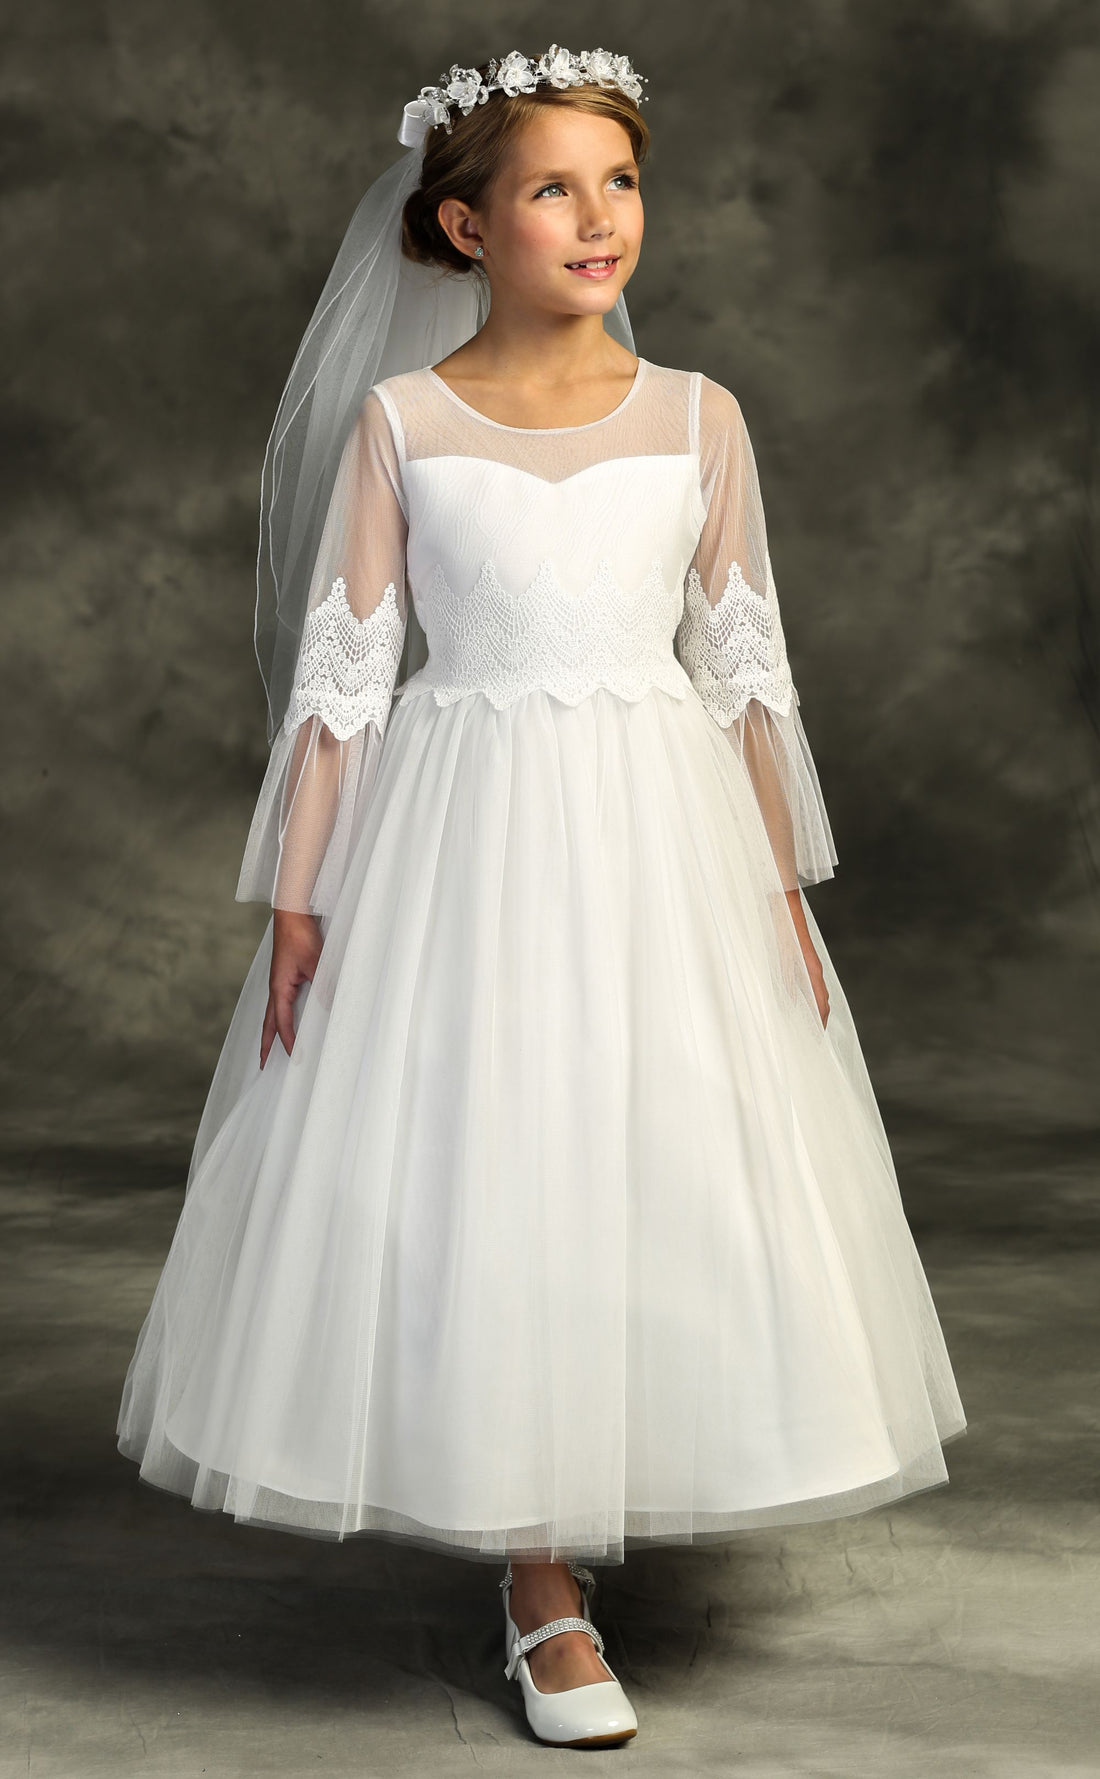 girl wearing white communion dress with veil 